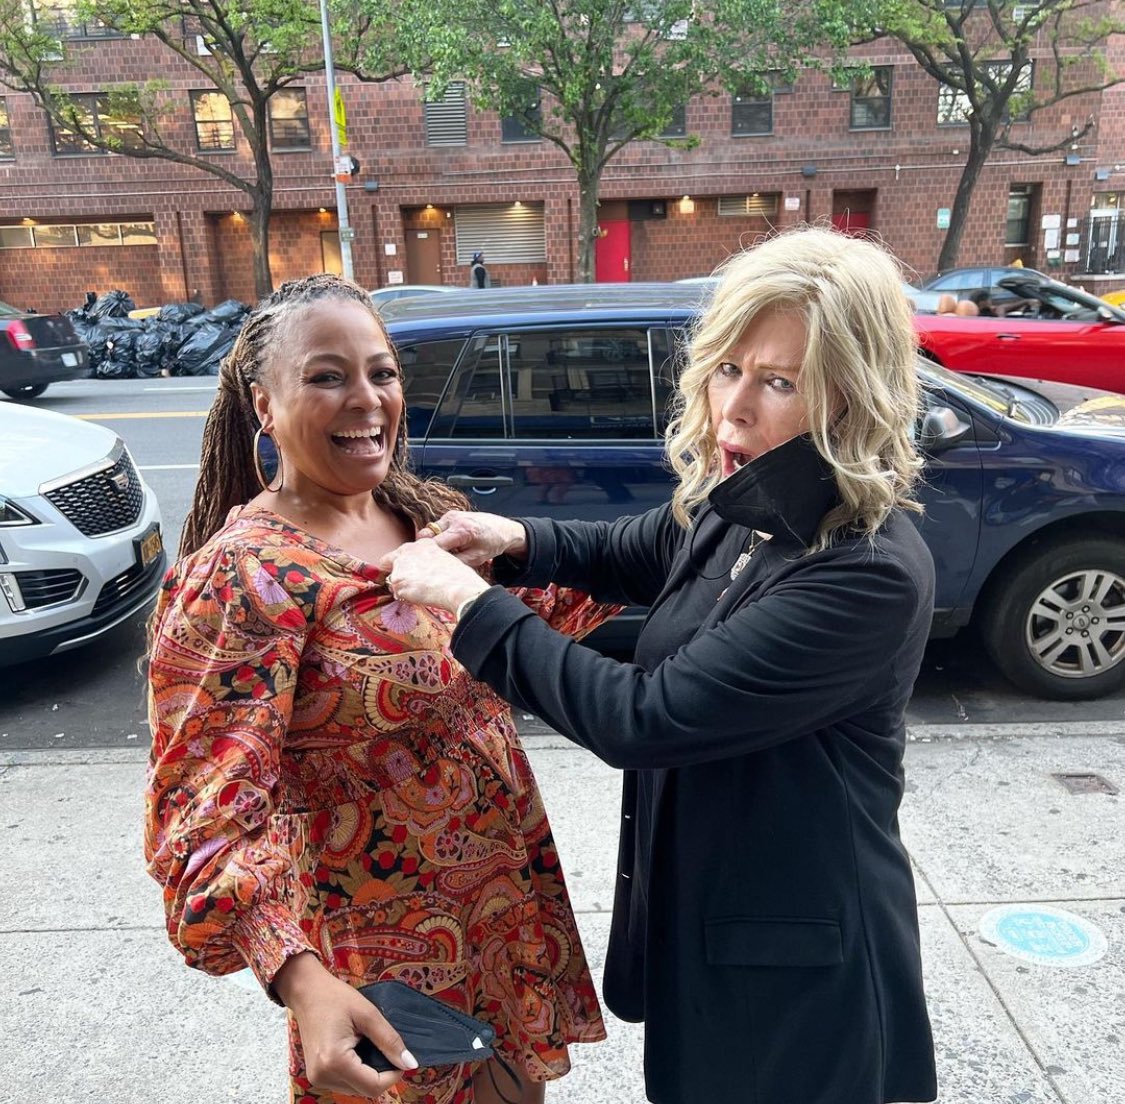 Biggest hugs to the bestest BIRTHDAY KWEEN #KimFields 🎂🎊💐👑Love you to pieces and beyond my wonderful friend!! Hope your day is as special as you are!! ❤️#May12th #birthdaykween #kween #HBD #taurus #theupshaws #legend #icon #tvlegend #factsoflife #livingsingle #rhoa #netflix